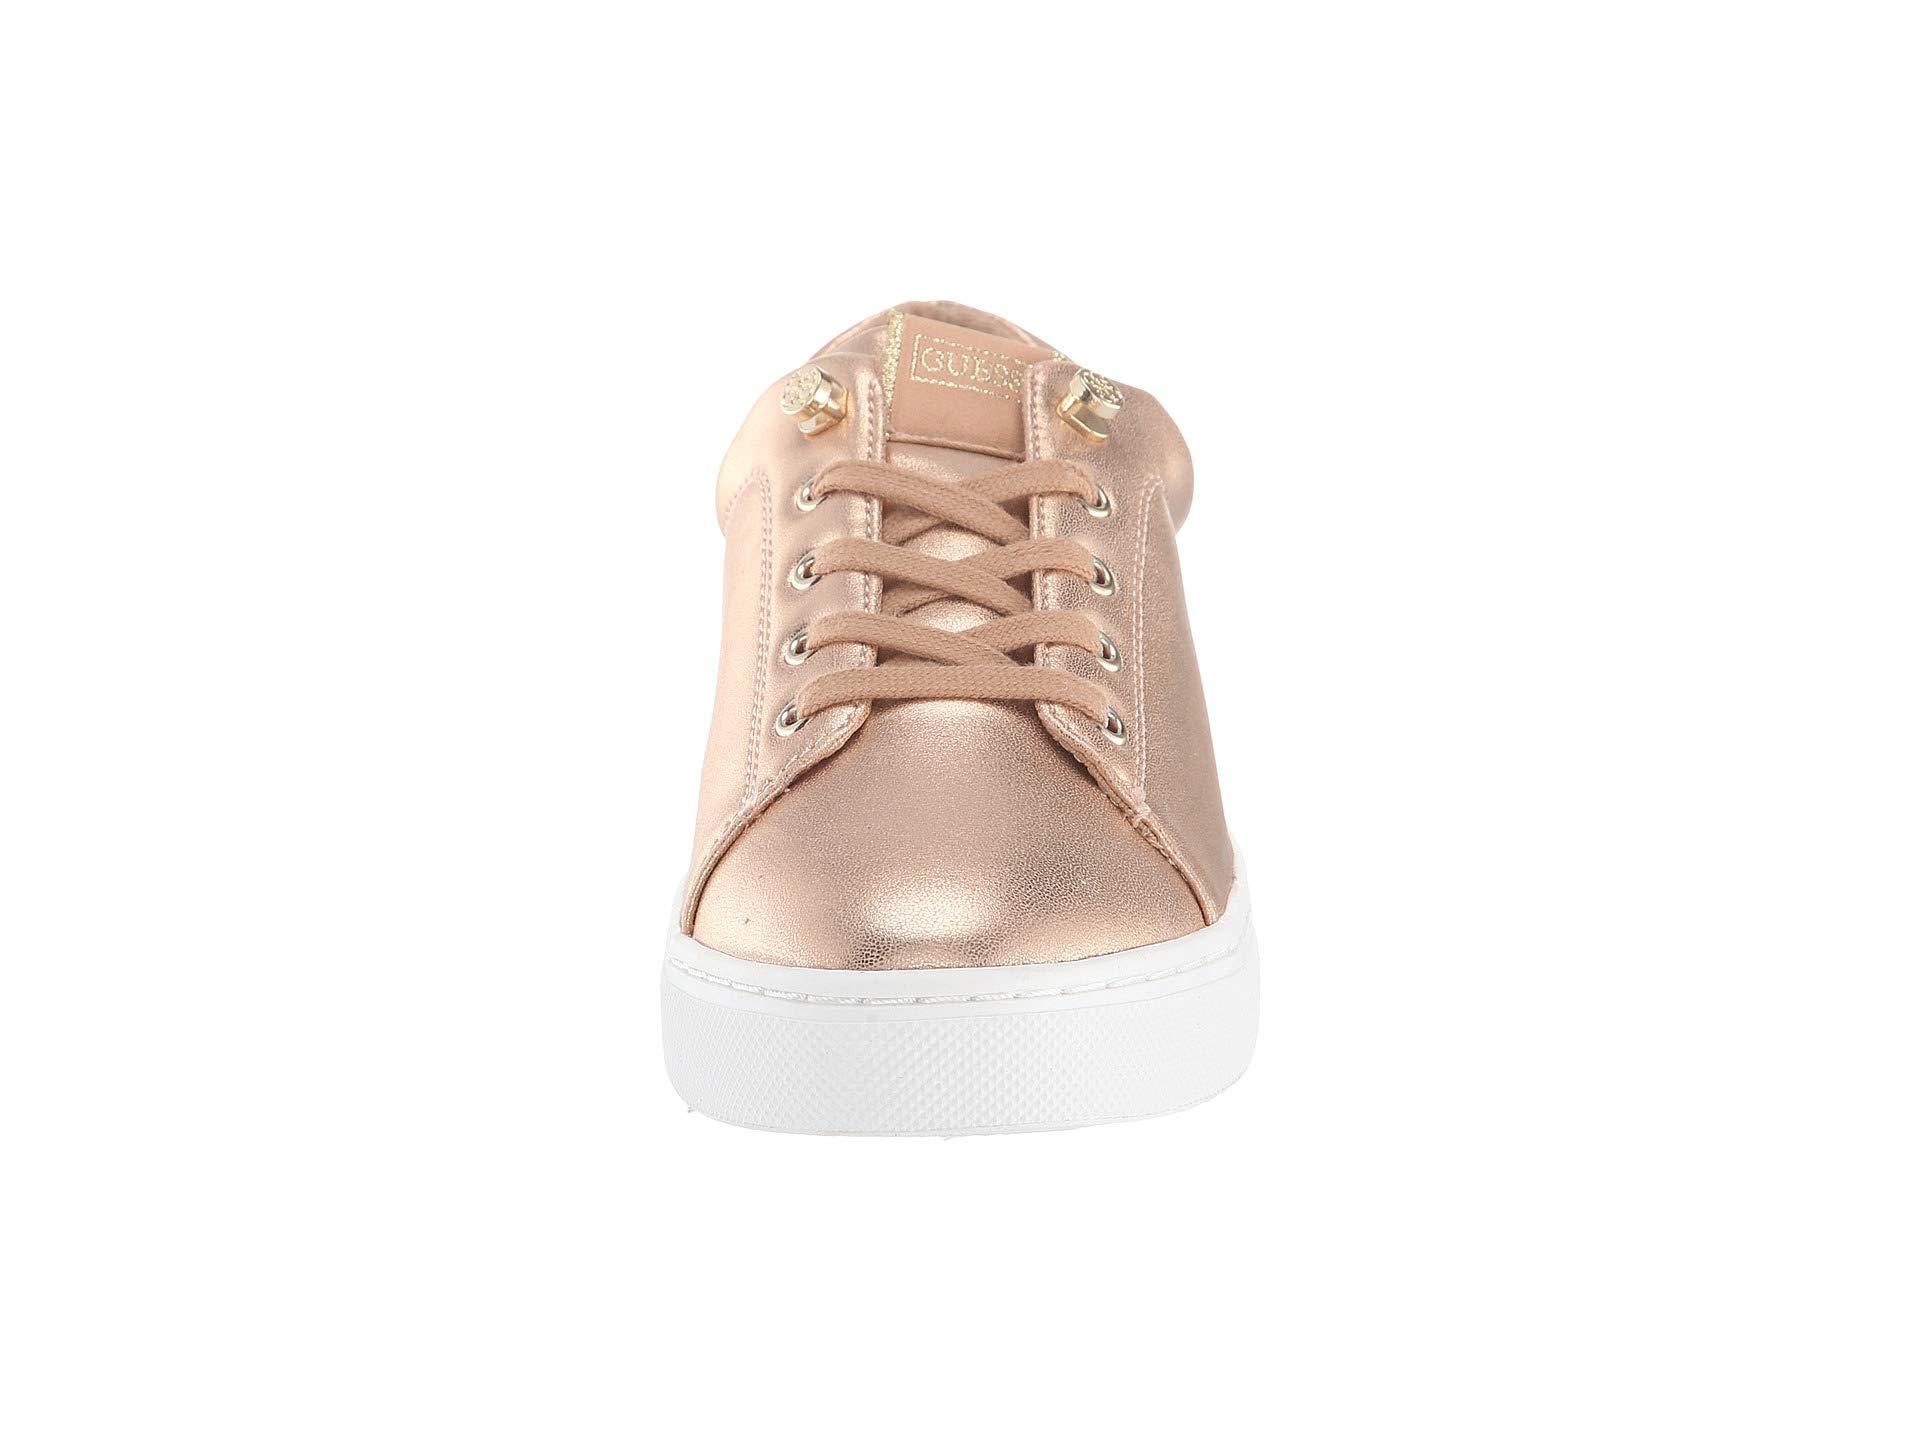 guess rose gold shoes